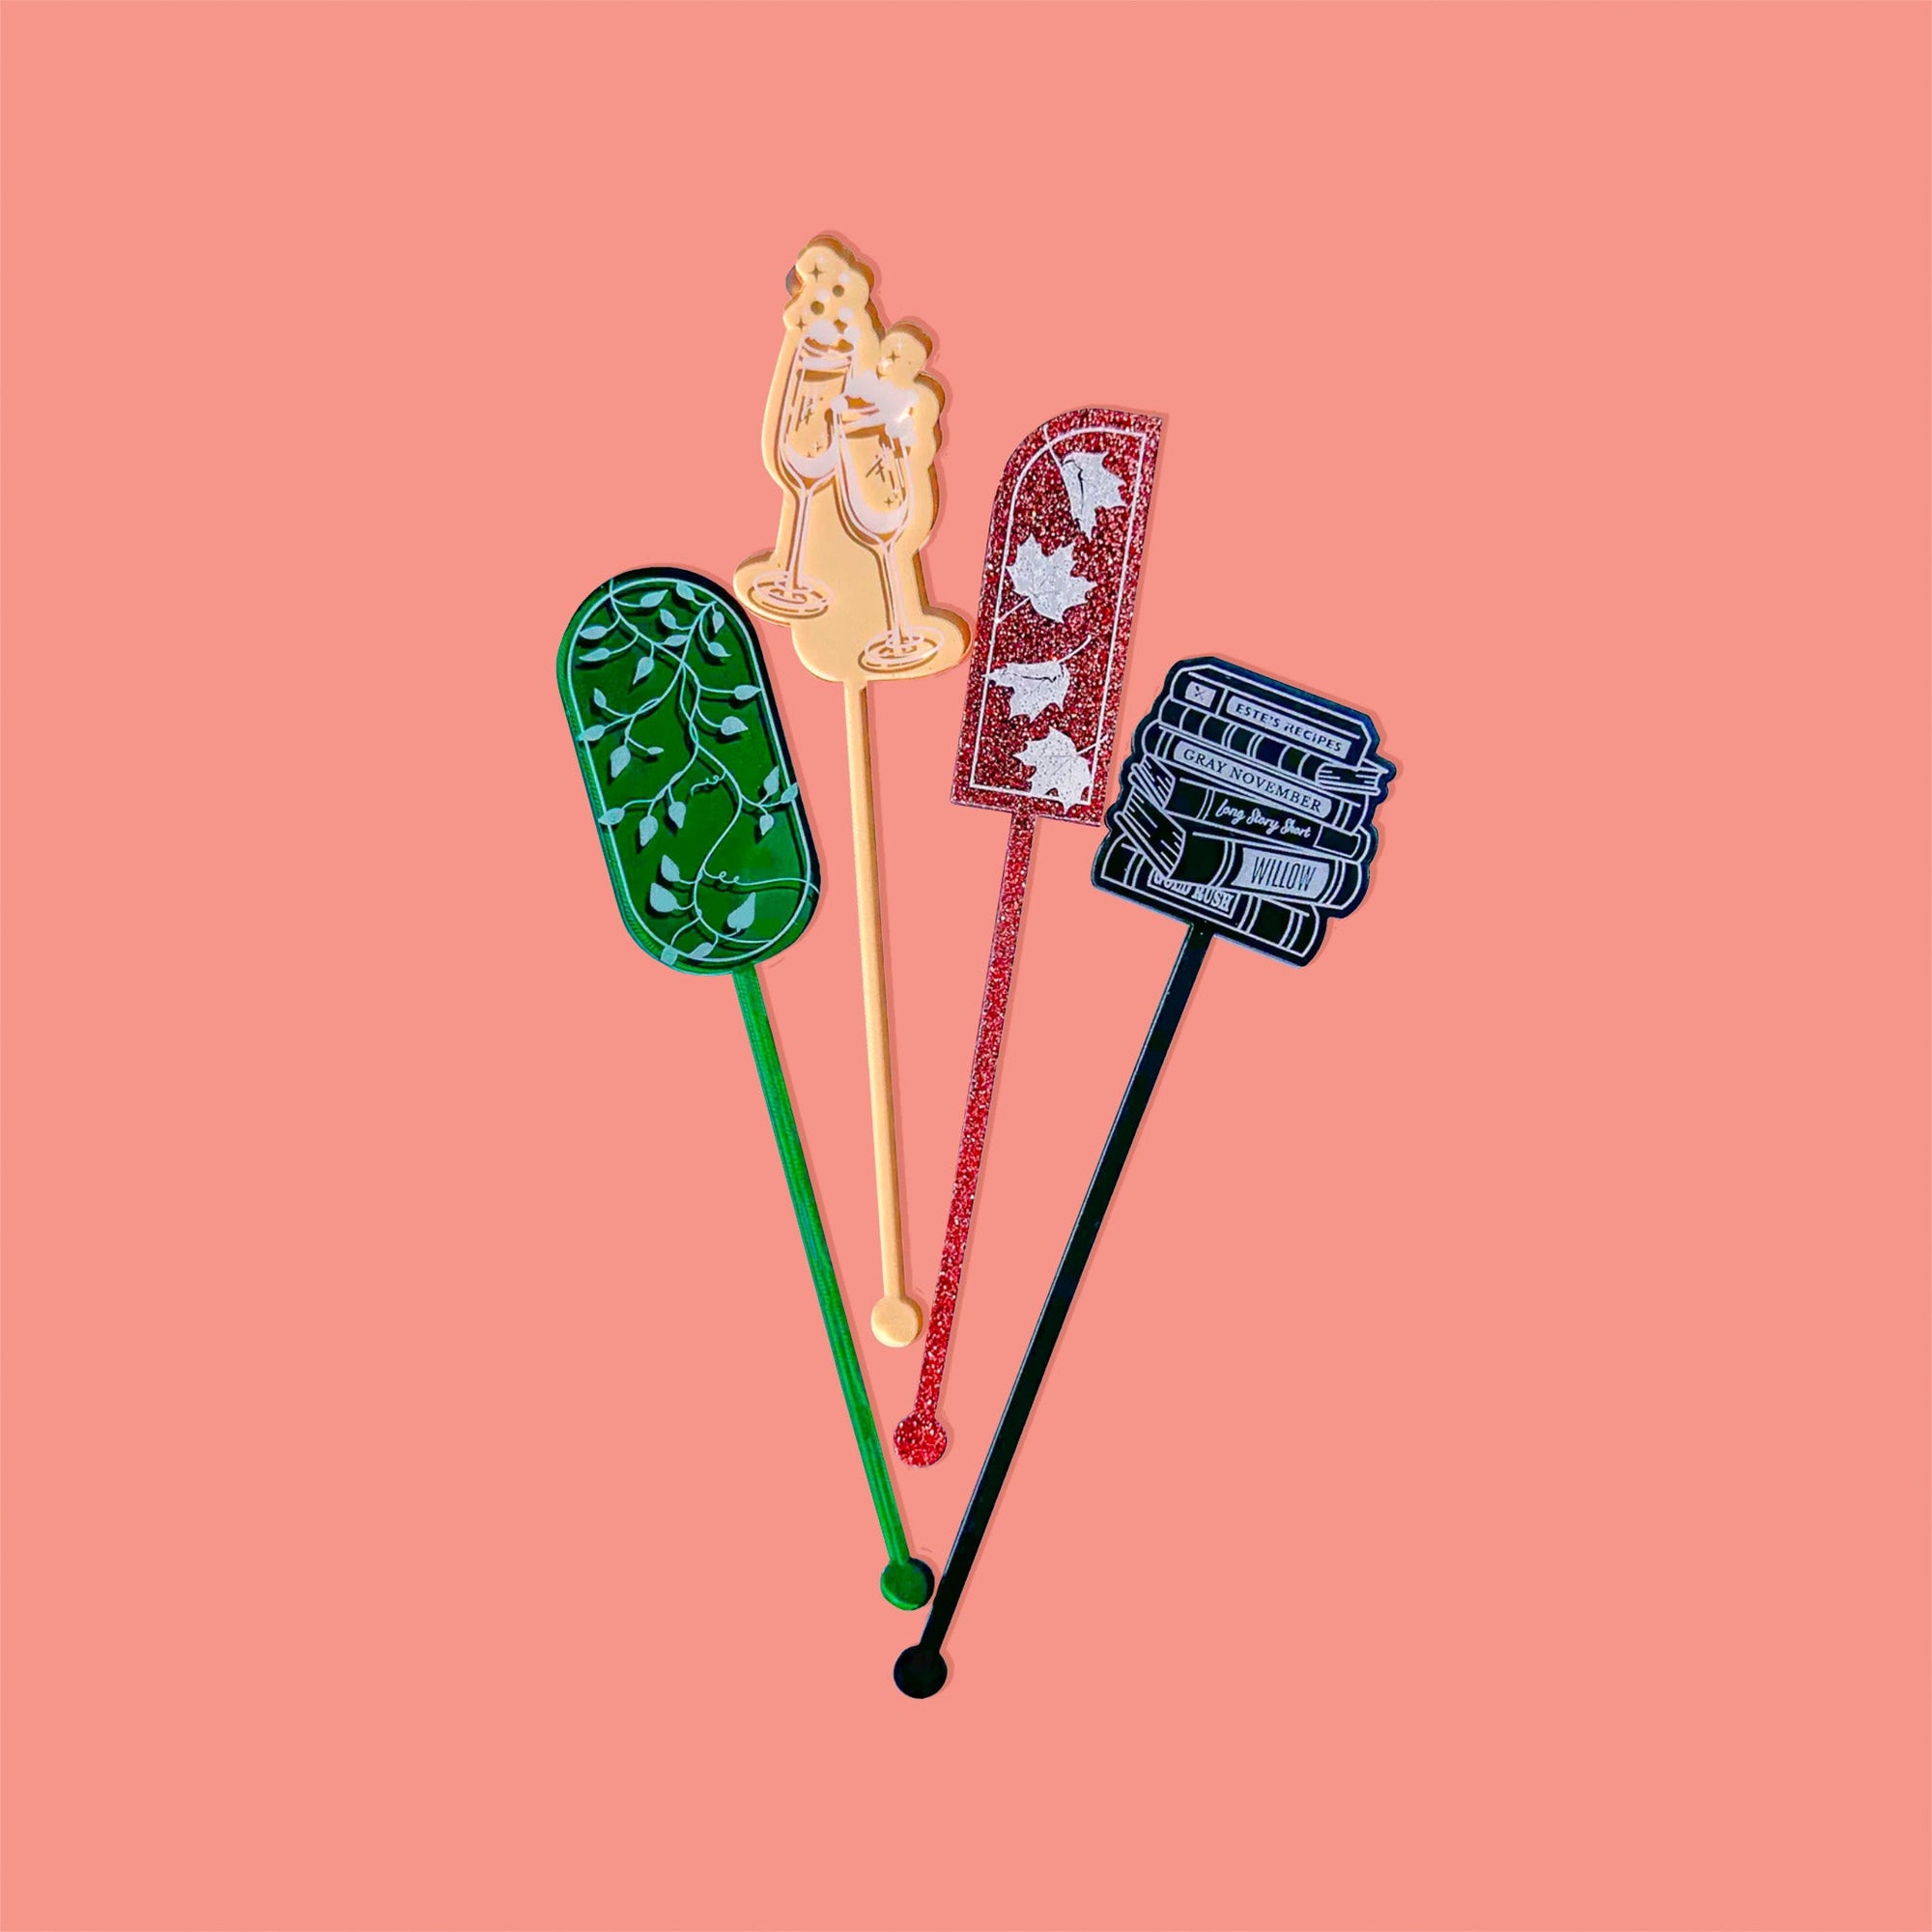 On a coral pink background sits acrylic stirrers. This Taylor Swift inspired set of 4 stirrers includes a dark green transparent ivy, a gold transparent bubbling champagne glasses, copper glitter fall leaves, and a bblack smoke book stack.